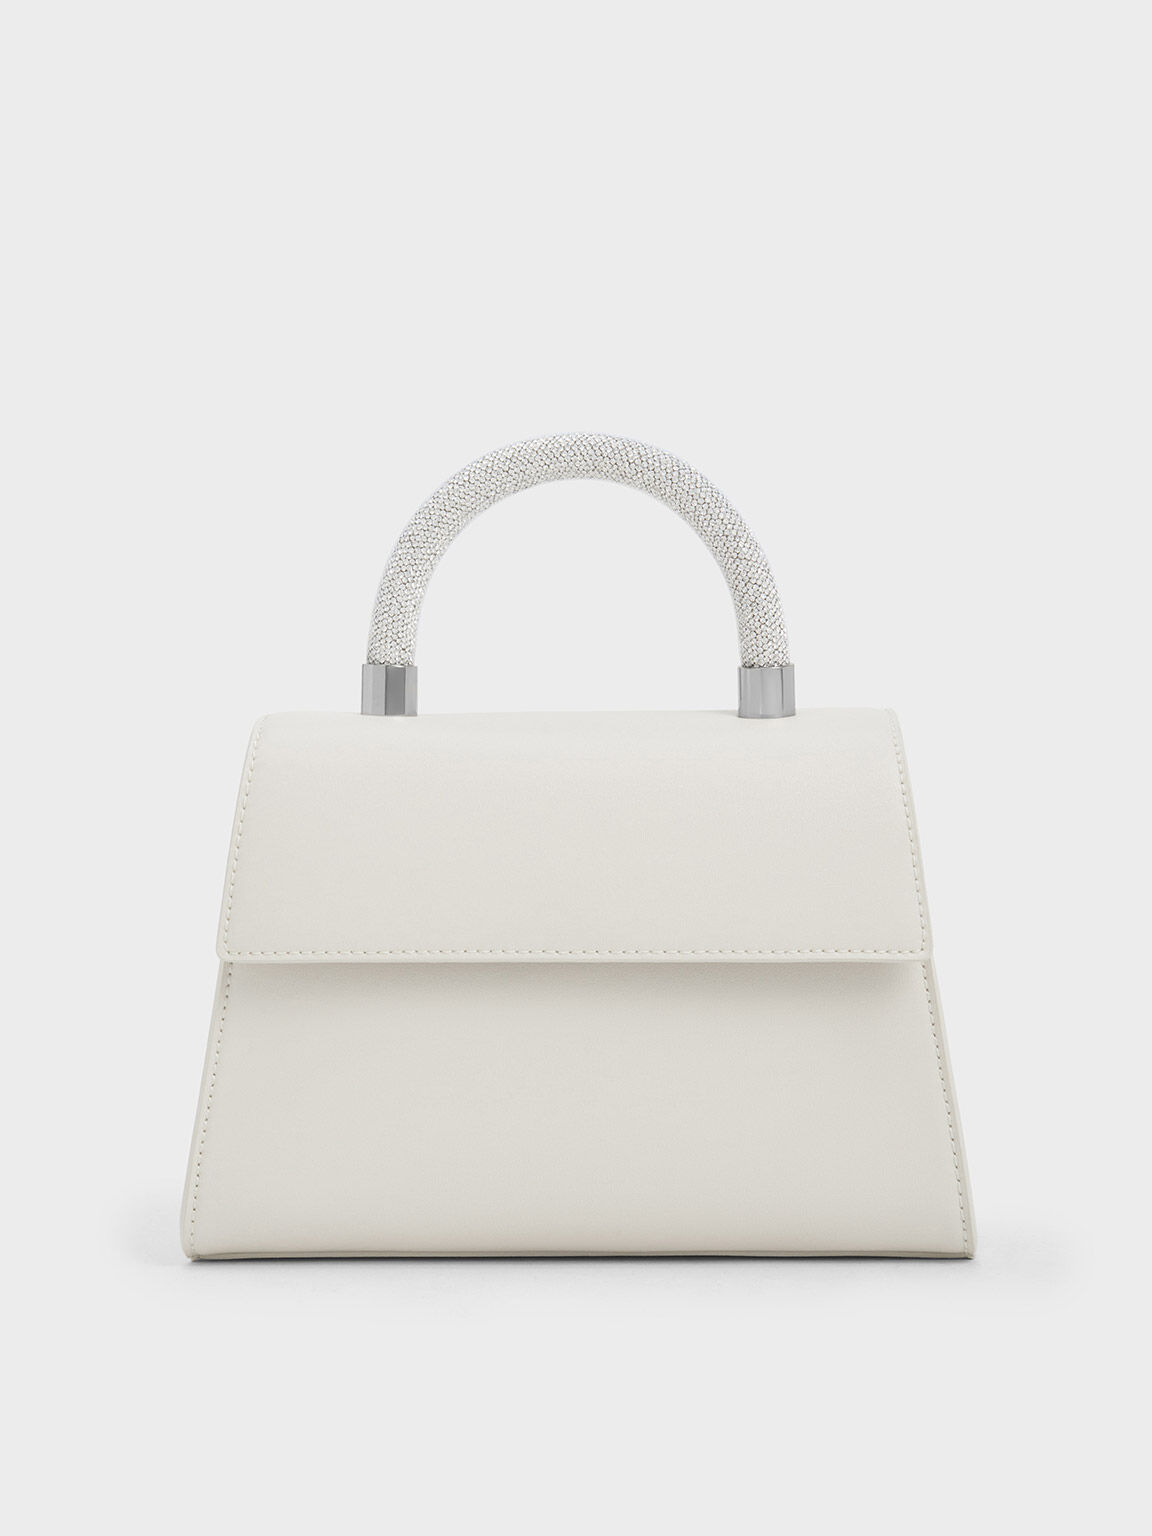 https://www.charleskeith.co.id/dw/image/v2/BCWJ_PRD/on/demandware.static/-/Sites-id-products/default/dwc84571a6/images/hi-res/2024-L2-CK2-50271315-A-03-1.jpg?sw=504&sh=672